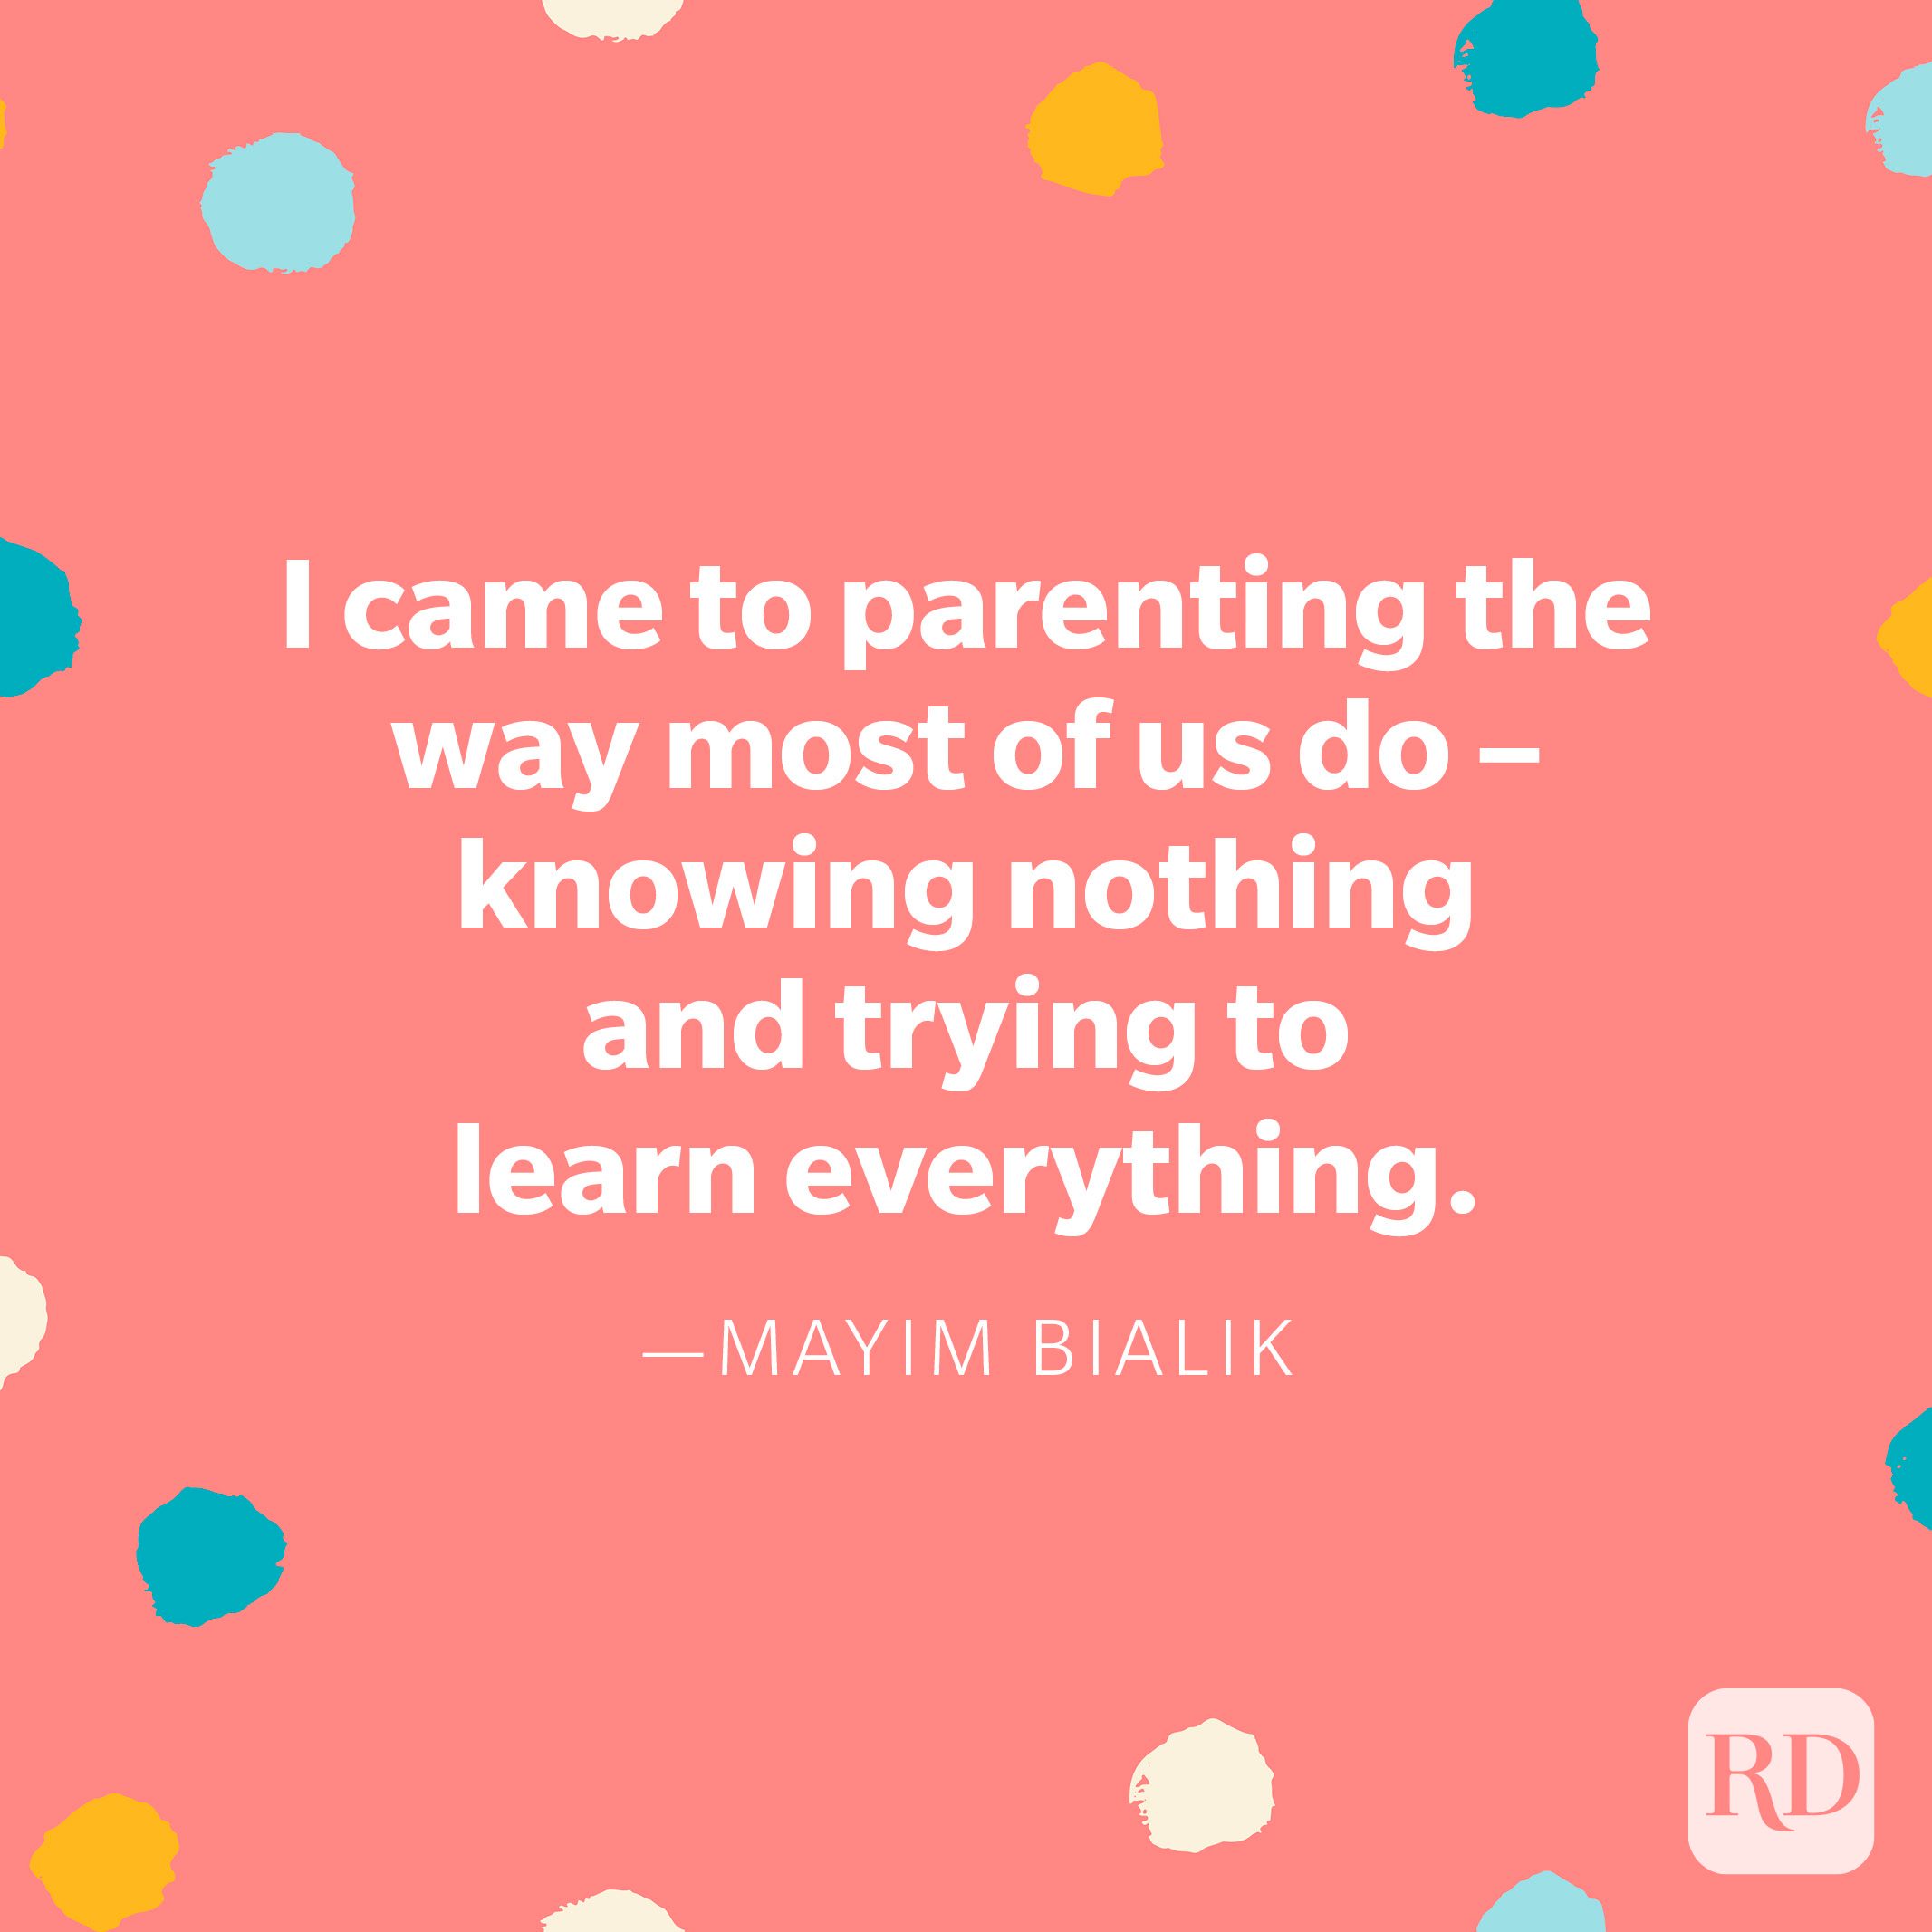 "I came to parenting the way most of us do – knowing nothing and trying to learn everything." — Mayim Bialik